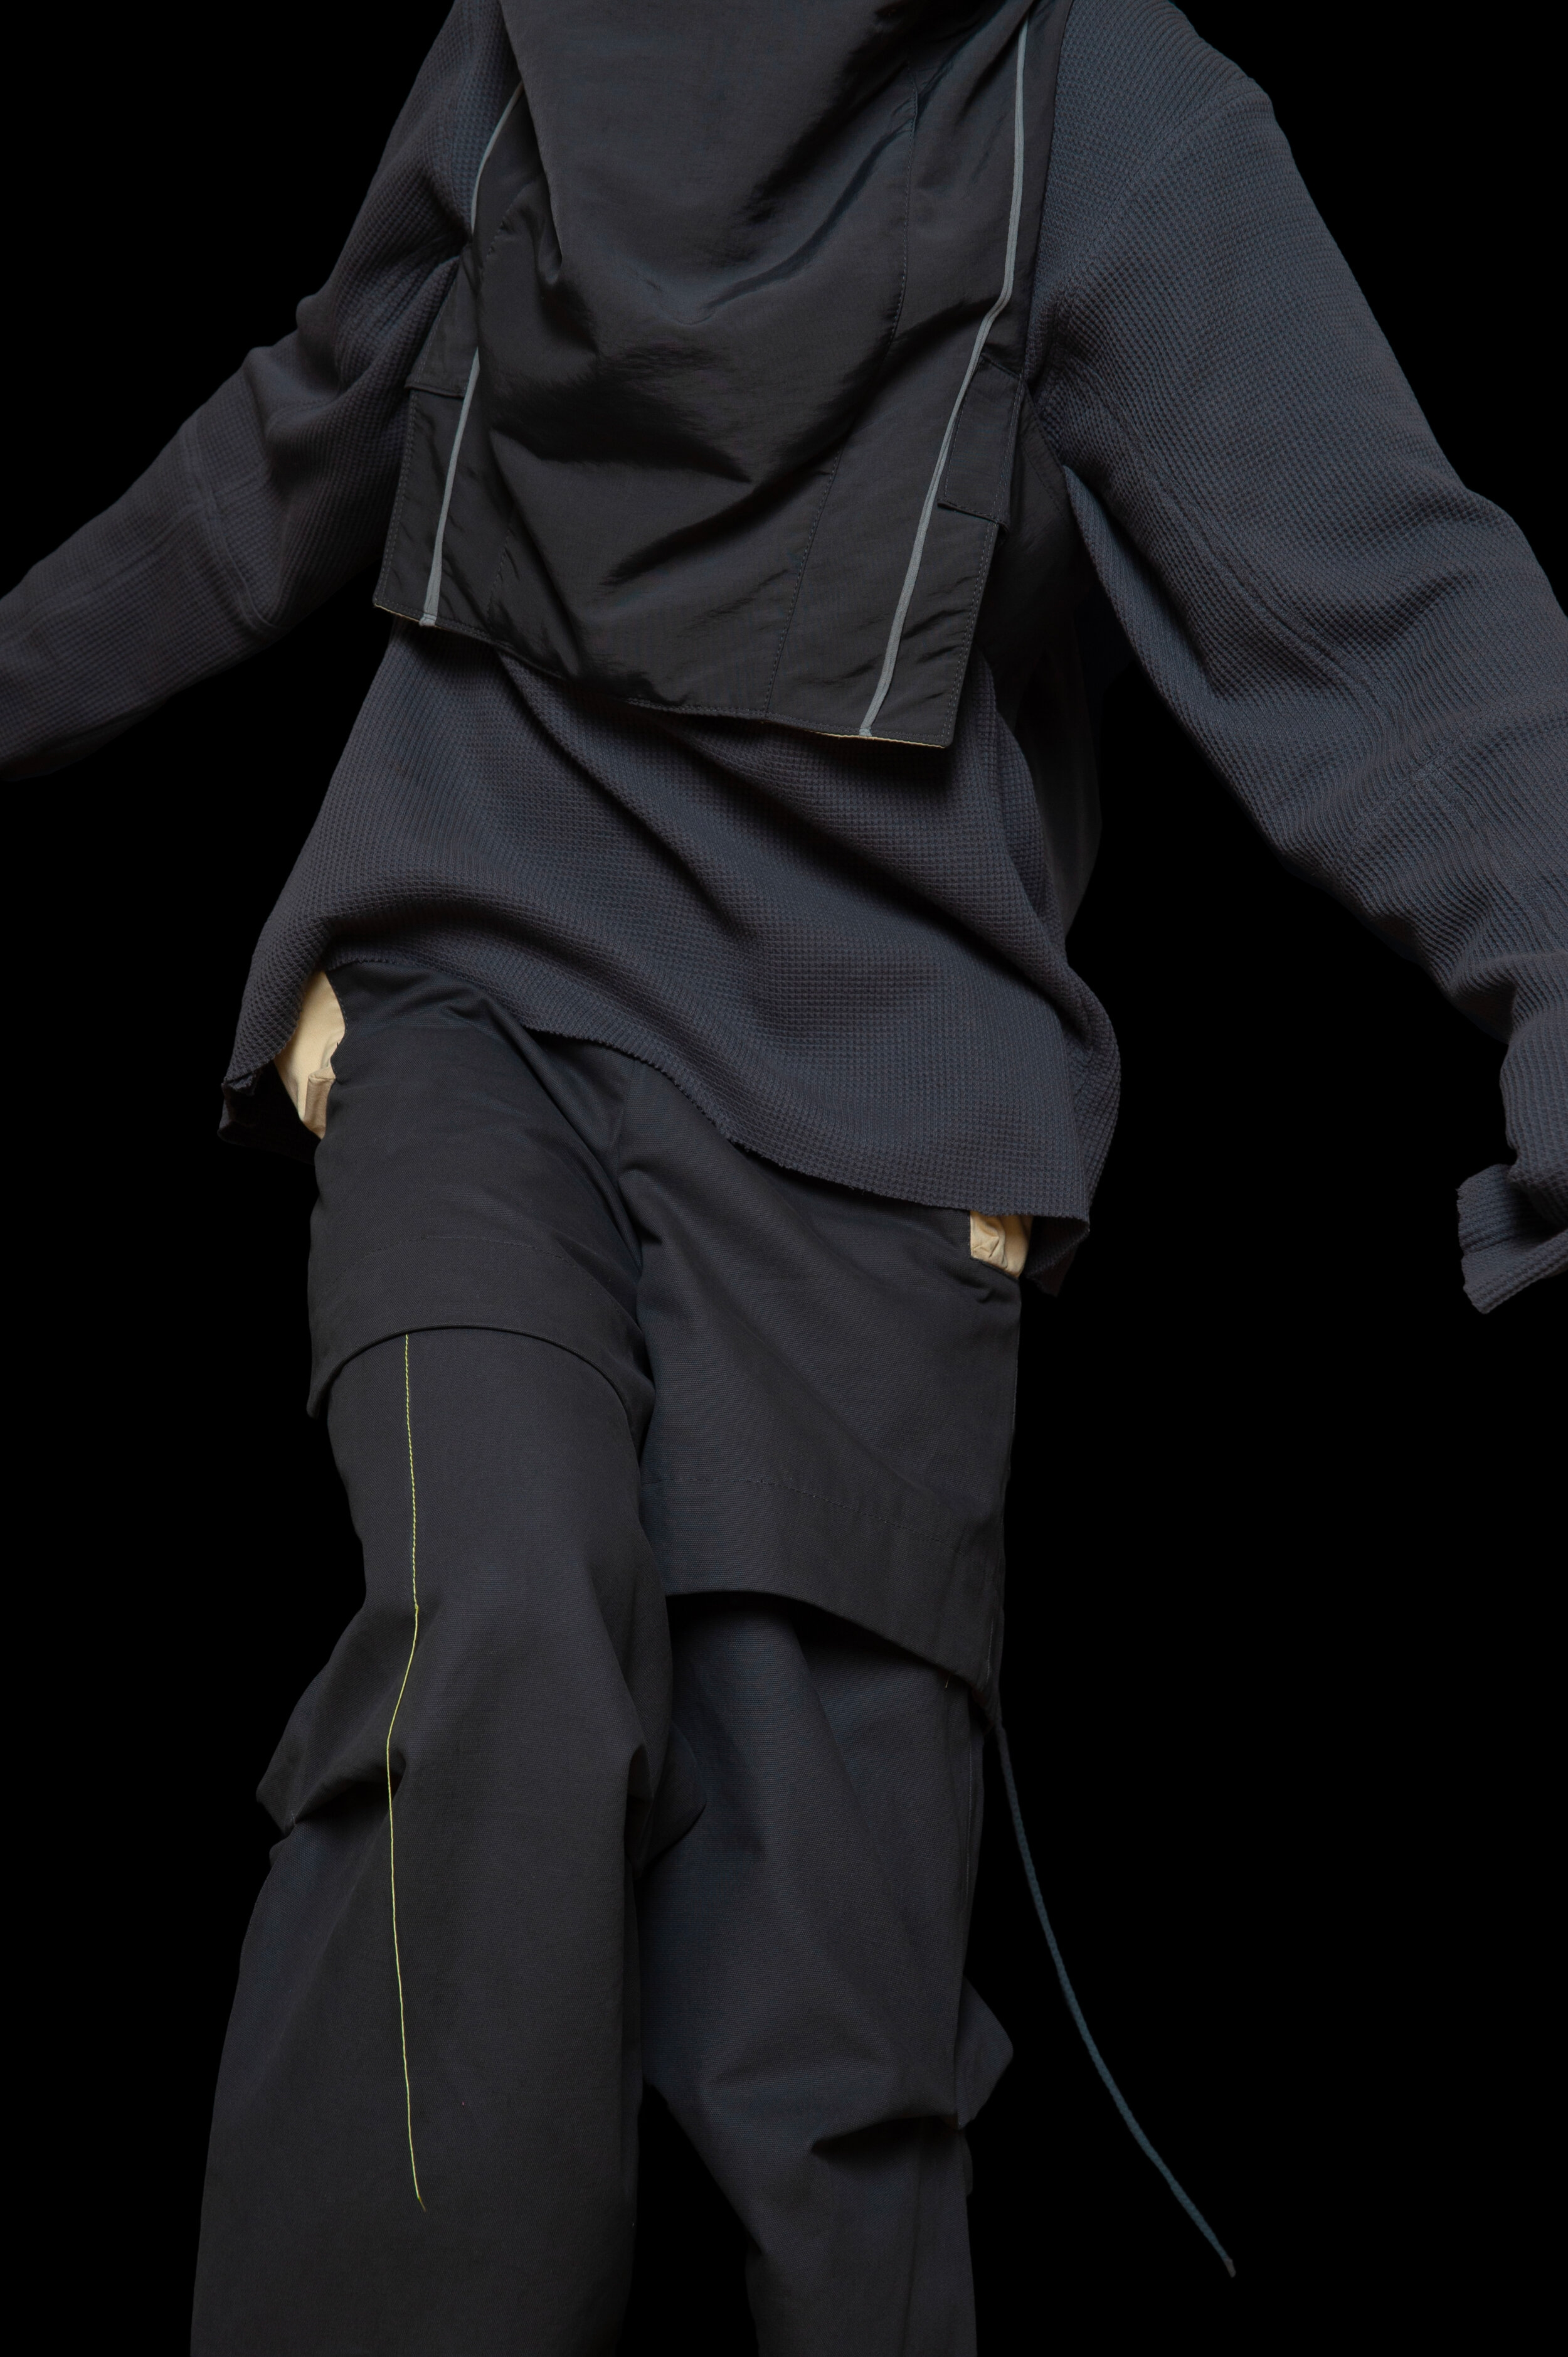 detail view of man wearing head liner cap, oxygen hooded vest bag, thermal jumper, and layered trouser from bryan jimenez fall winter 2020